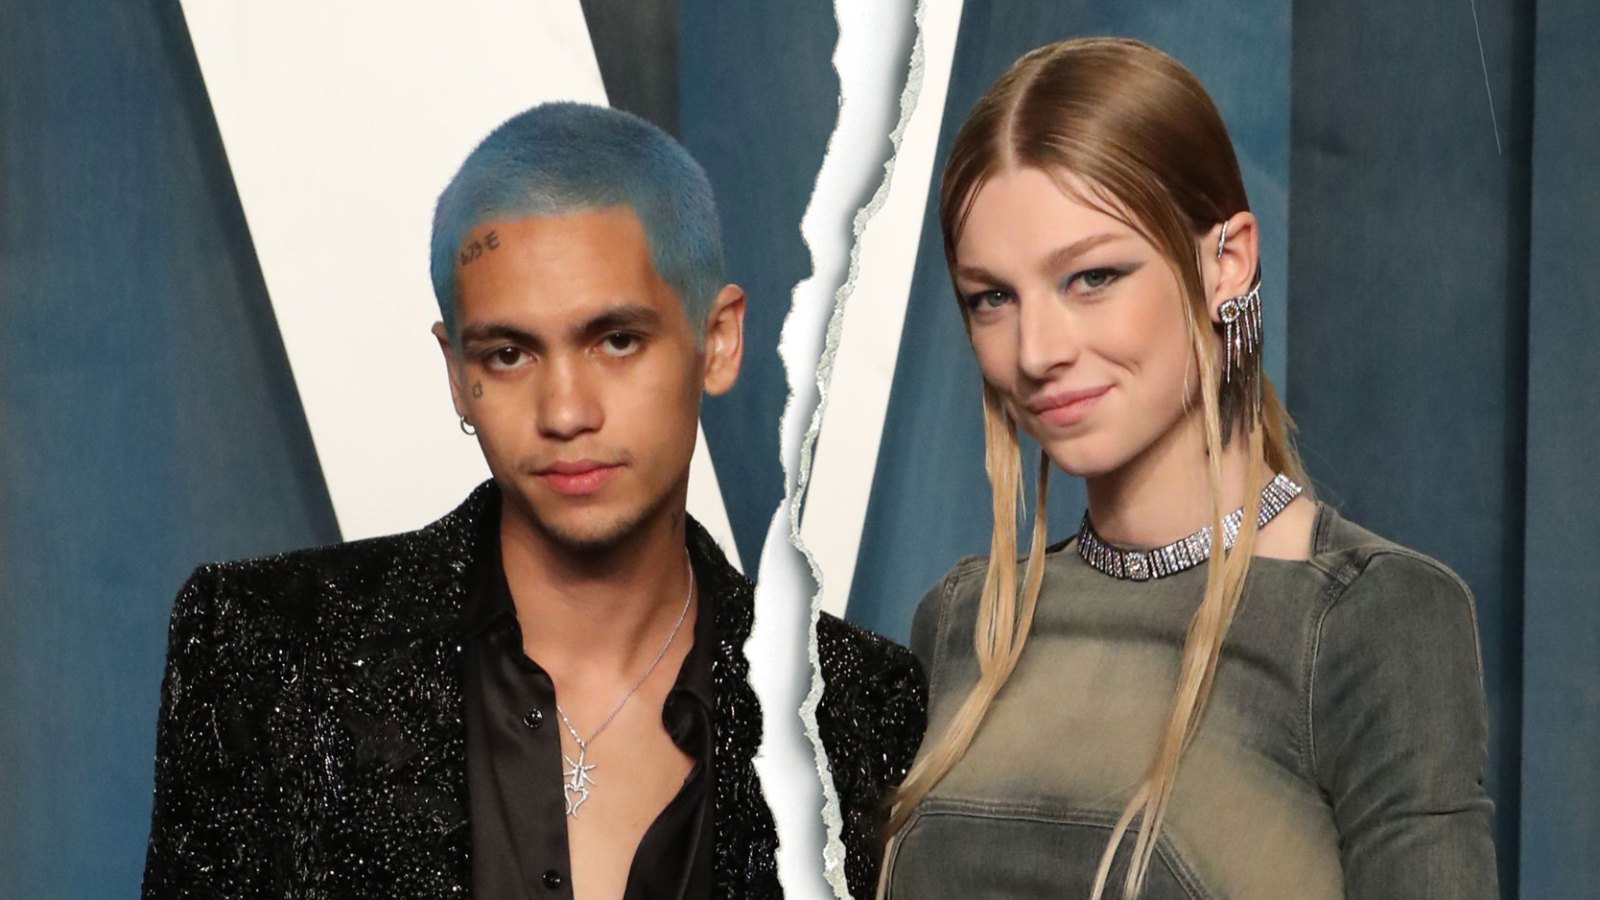 Euphoria's Dominic Fike and Hunter Schafer Split 2 Months After Making Their Relationship Official